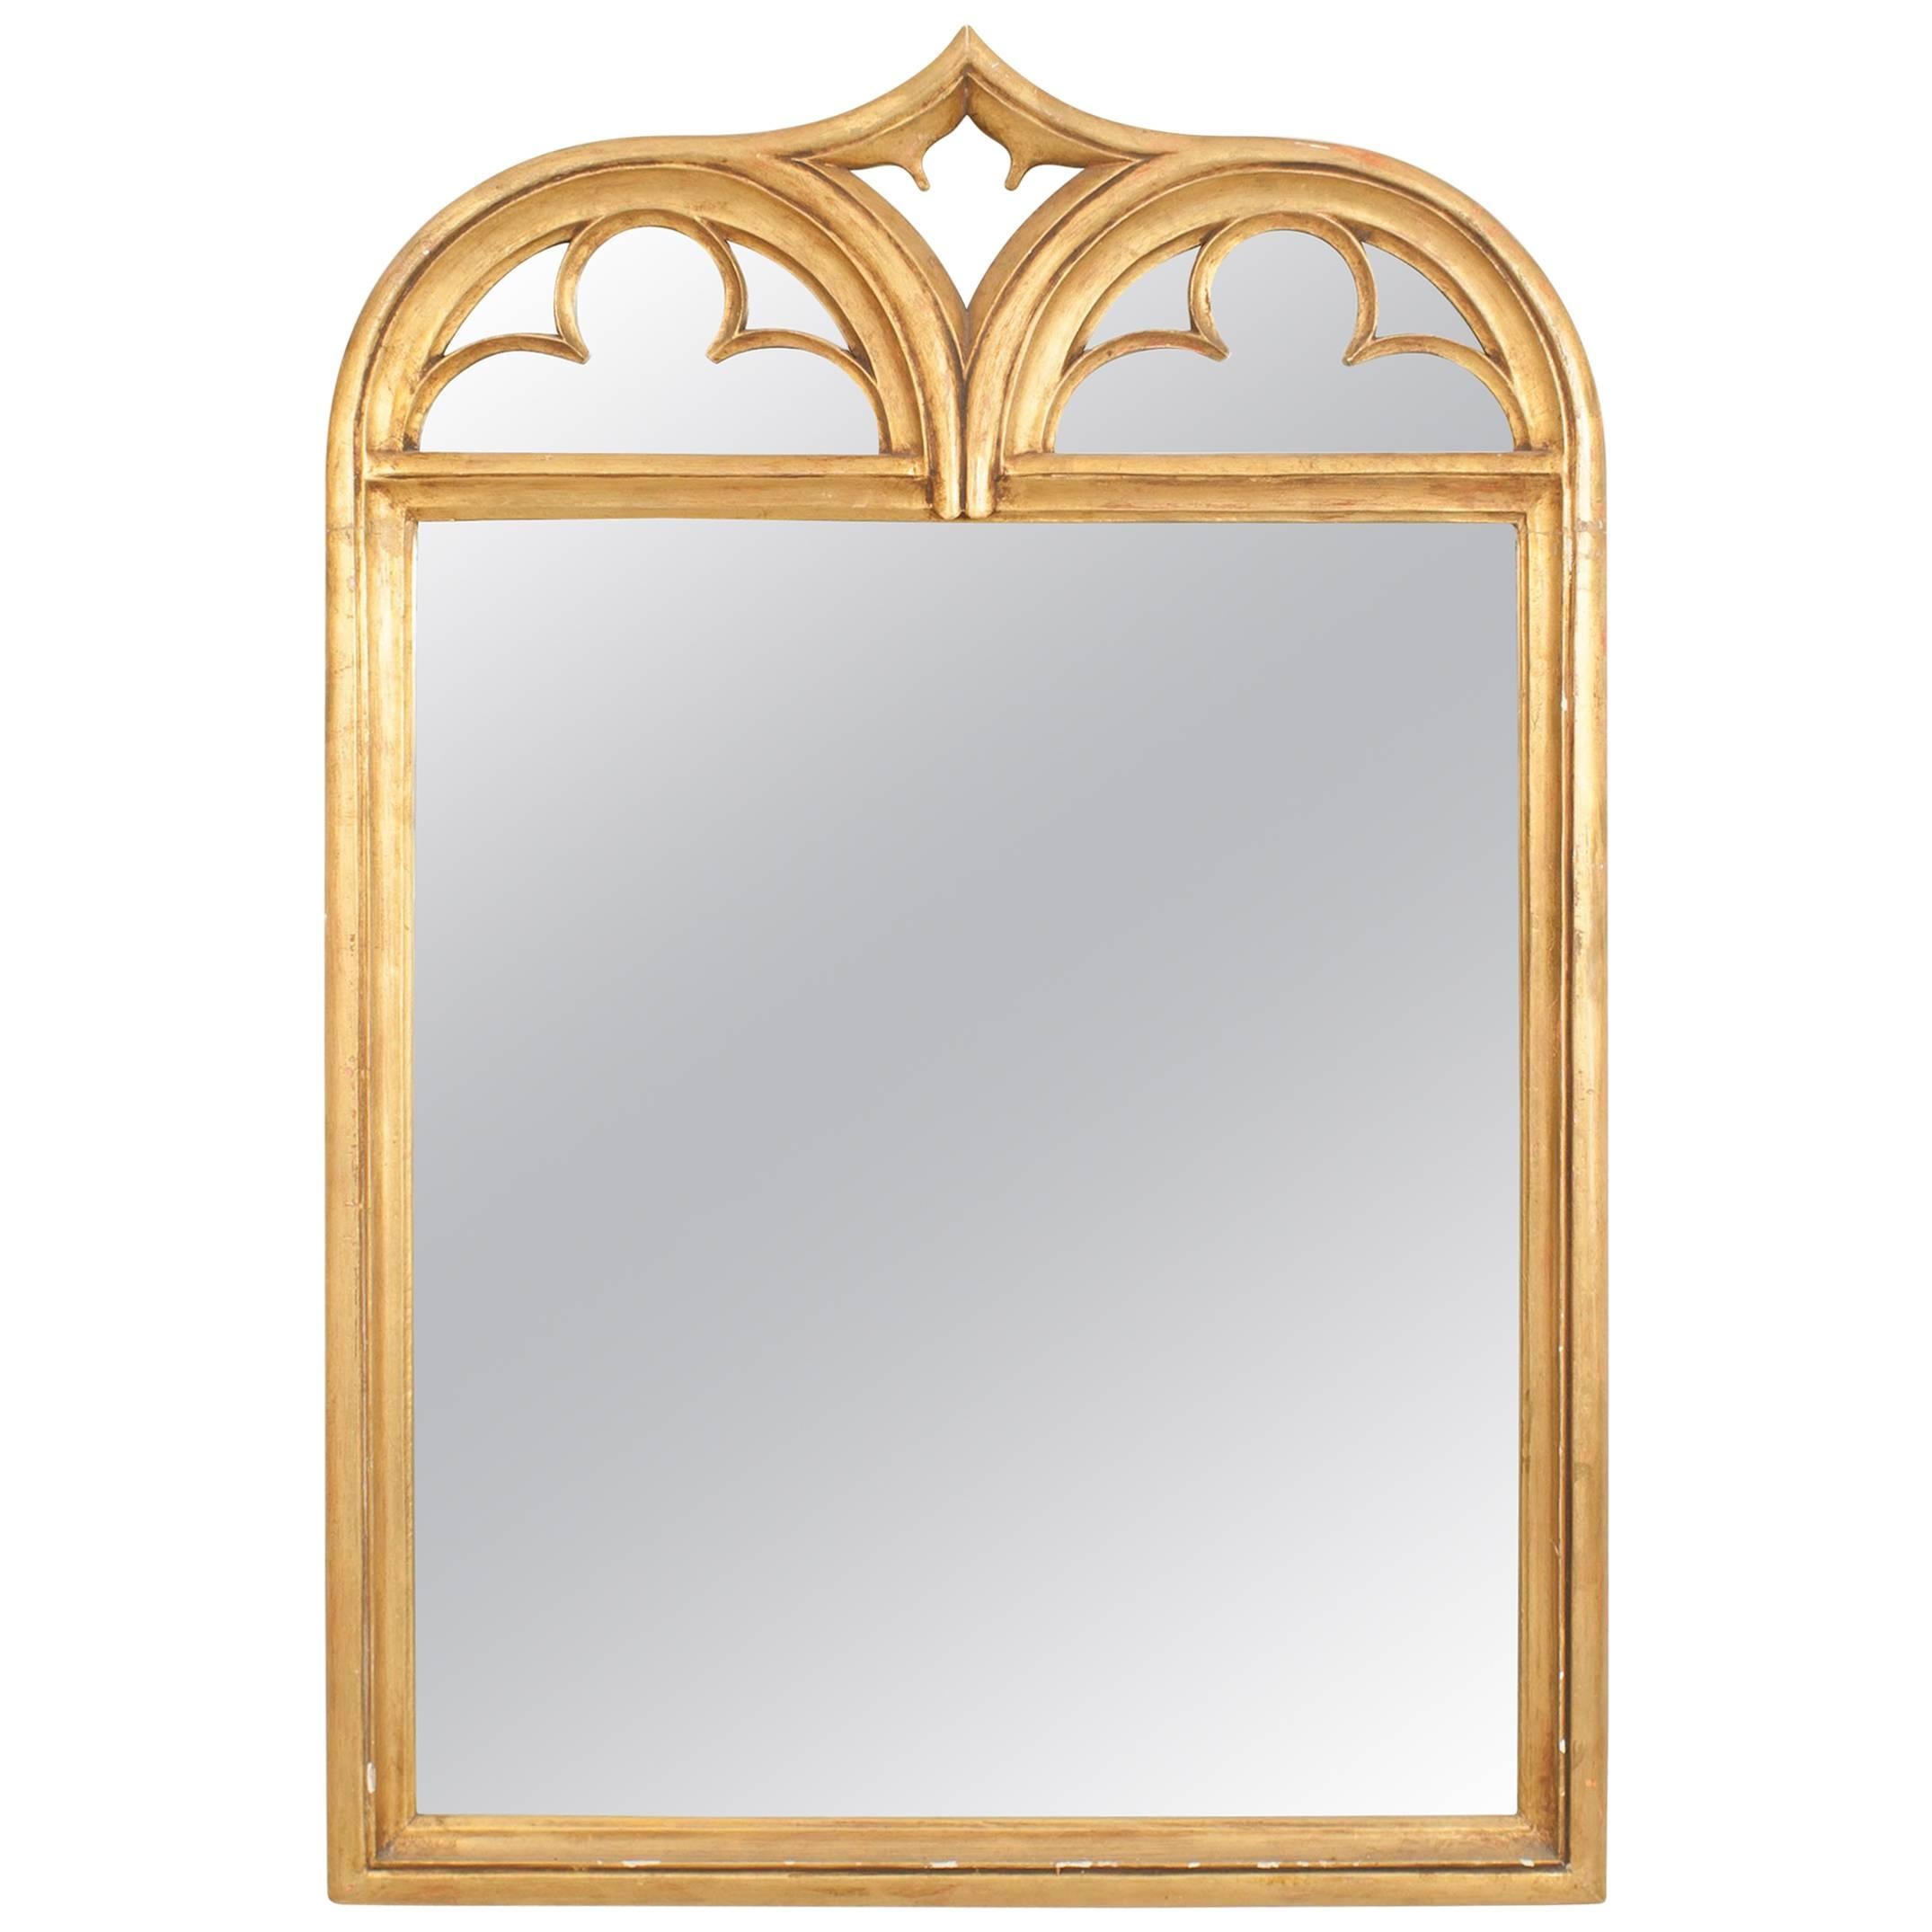 American Gothic Style Gold Painted Wall Mirror, 19th-20th Century